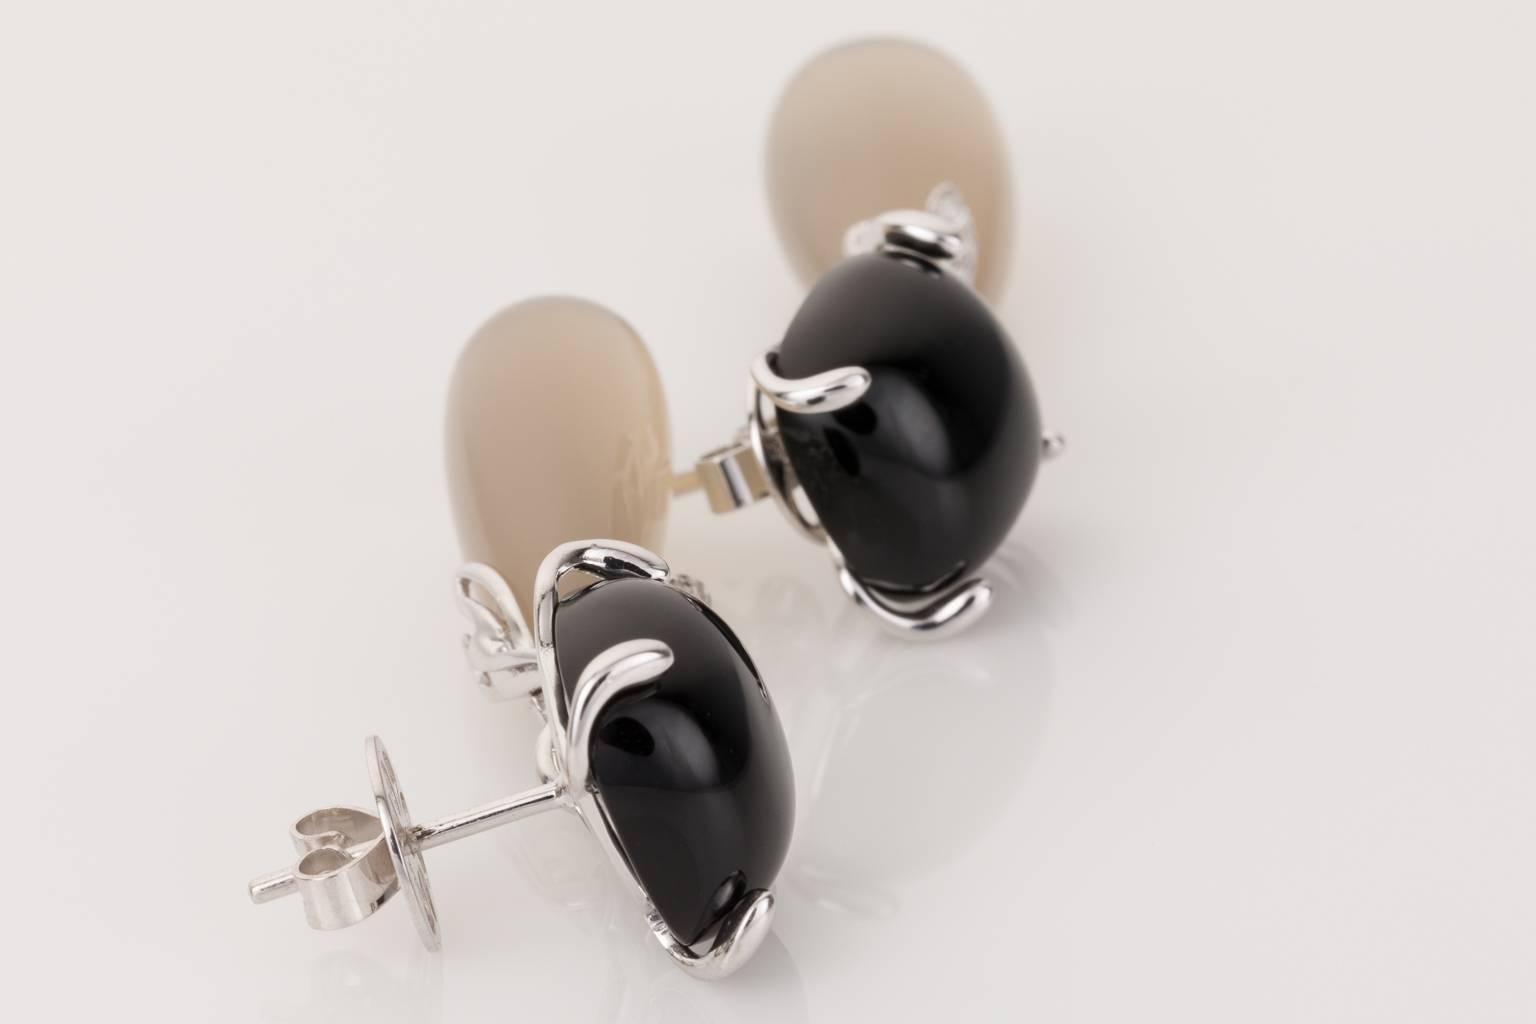 Elegant and sophisticated, these stunning 18k white gold earrings look so superb on the ear. Featuring a cushion cut black onyx cabochon stud set in a four prong setting, with a brilliant cut diamond twist suspending an elongated pear shaped